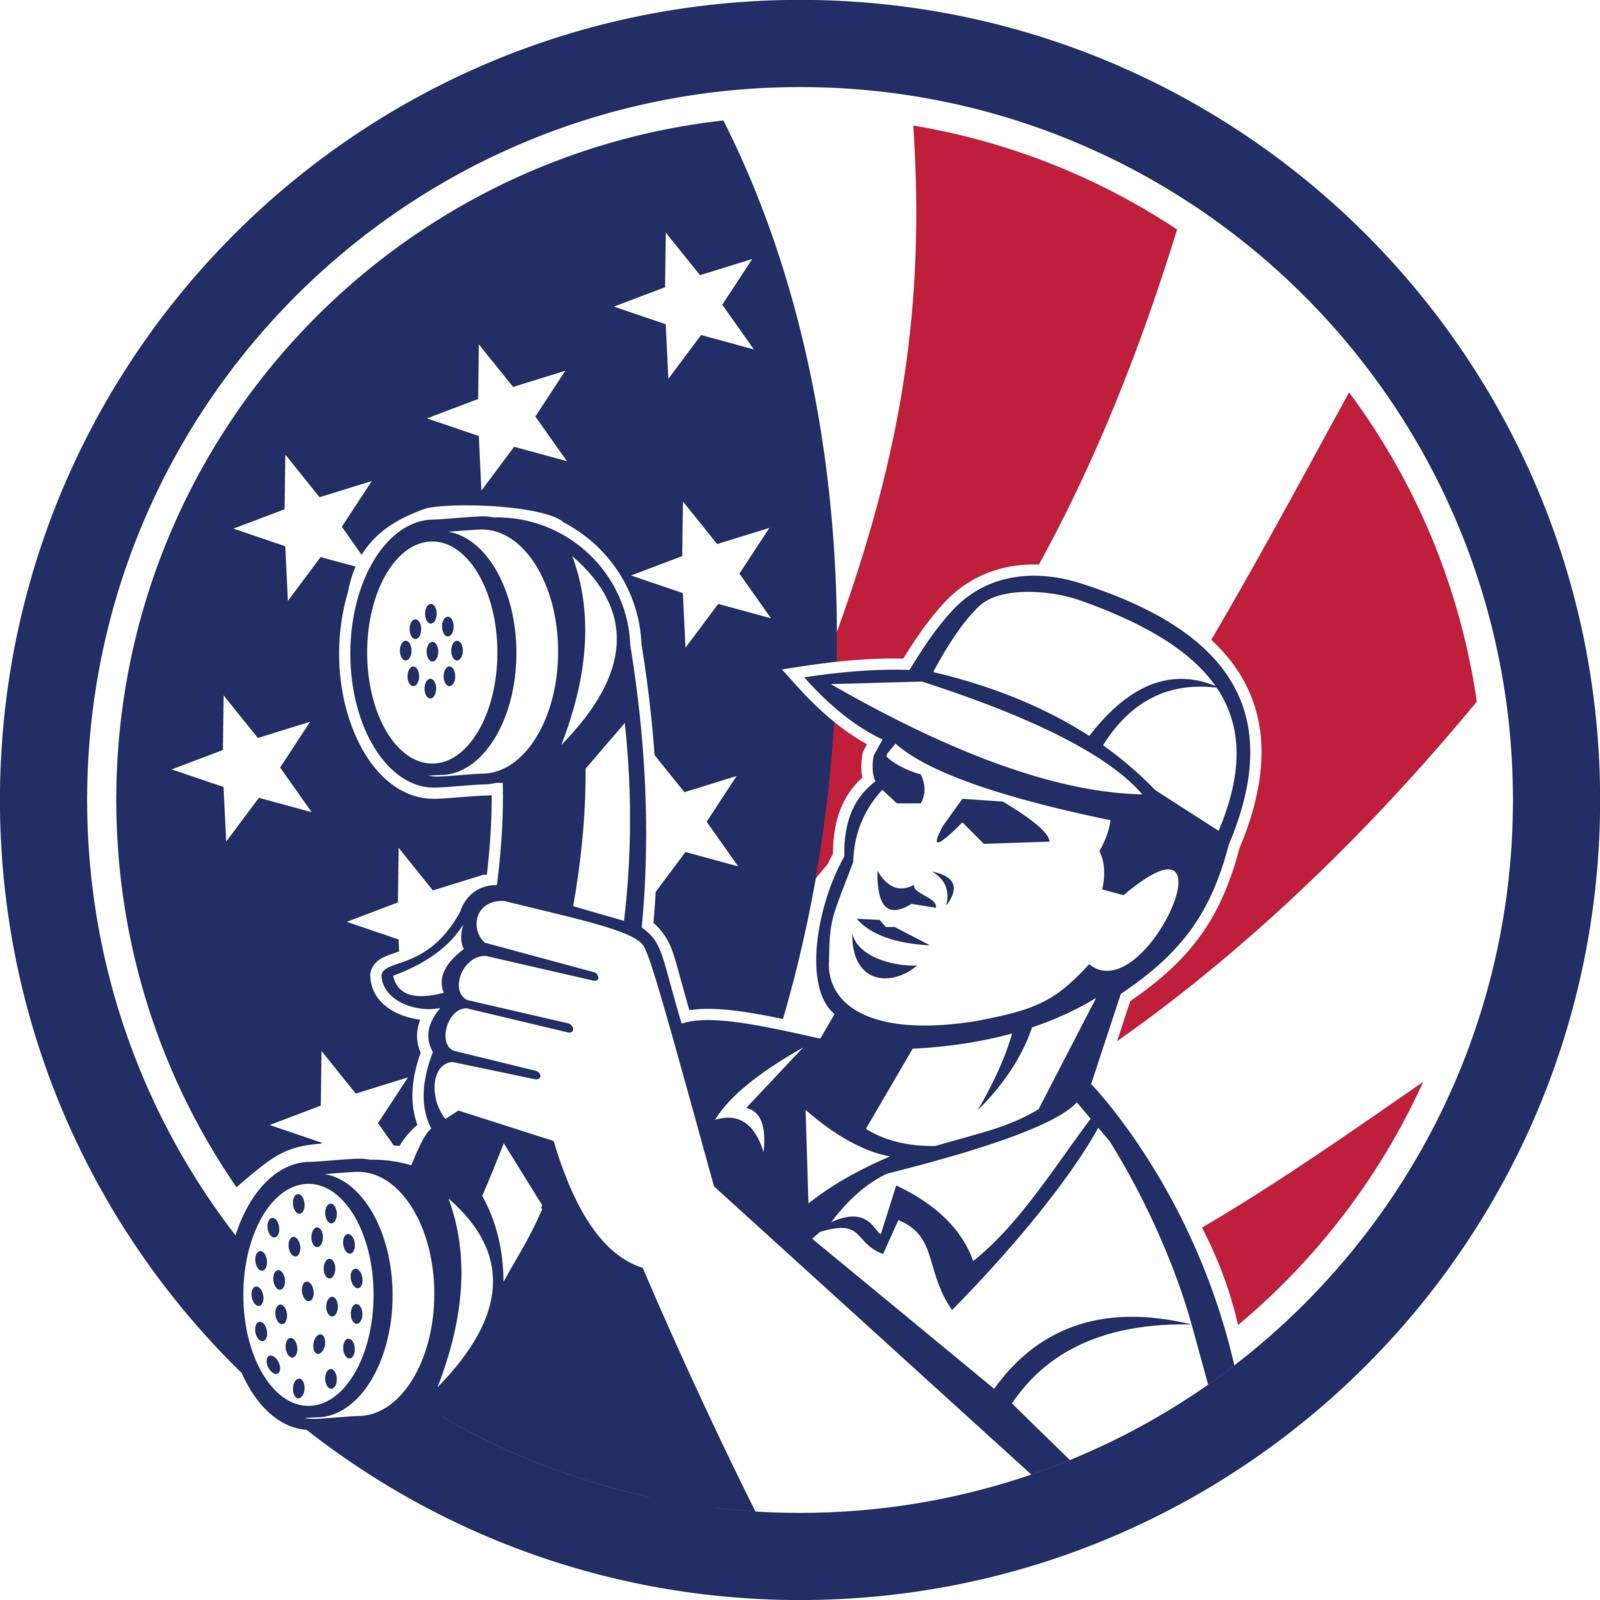 Icon retro style illustration of an American  telephone installation repair technician or  repairman holding phone  with United States of America USA star spangled banner inside circle.